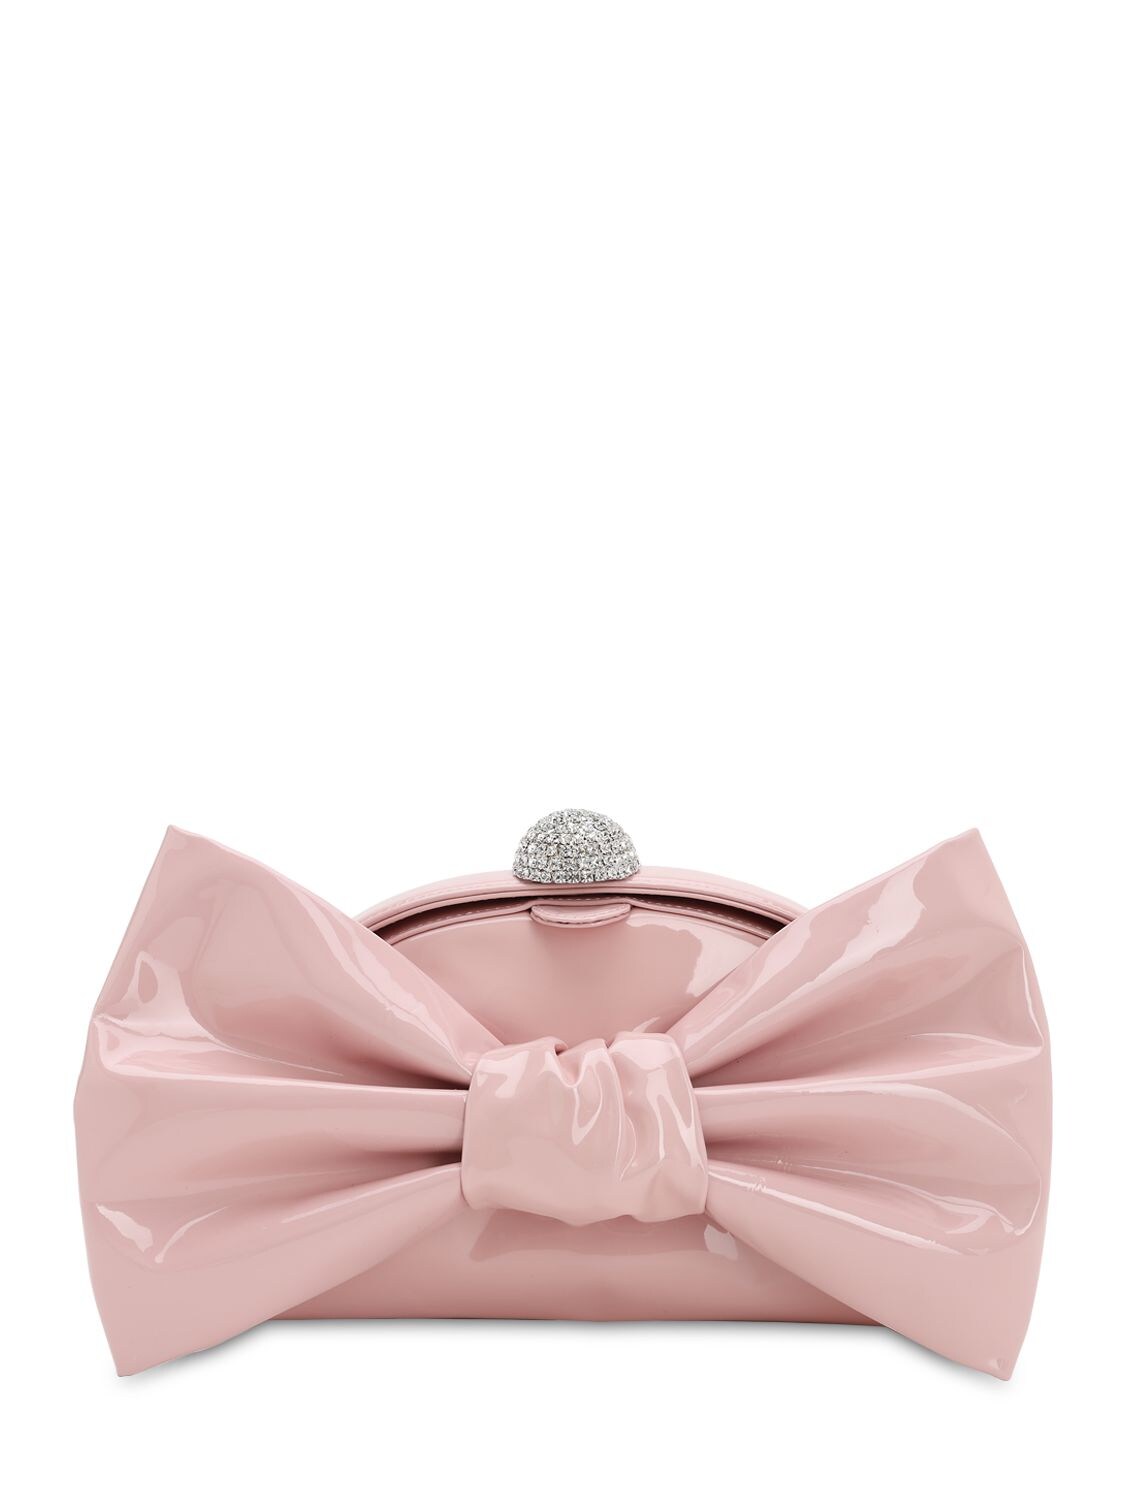 ALESSANDRA RICH PATENT LEATHER BOW CLUTCH,70I5CL001-MTY4MG2